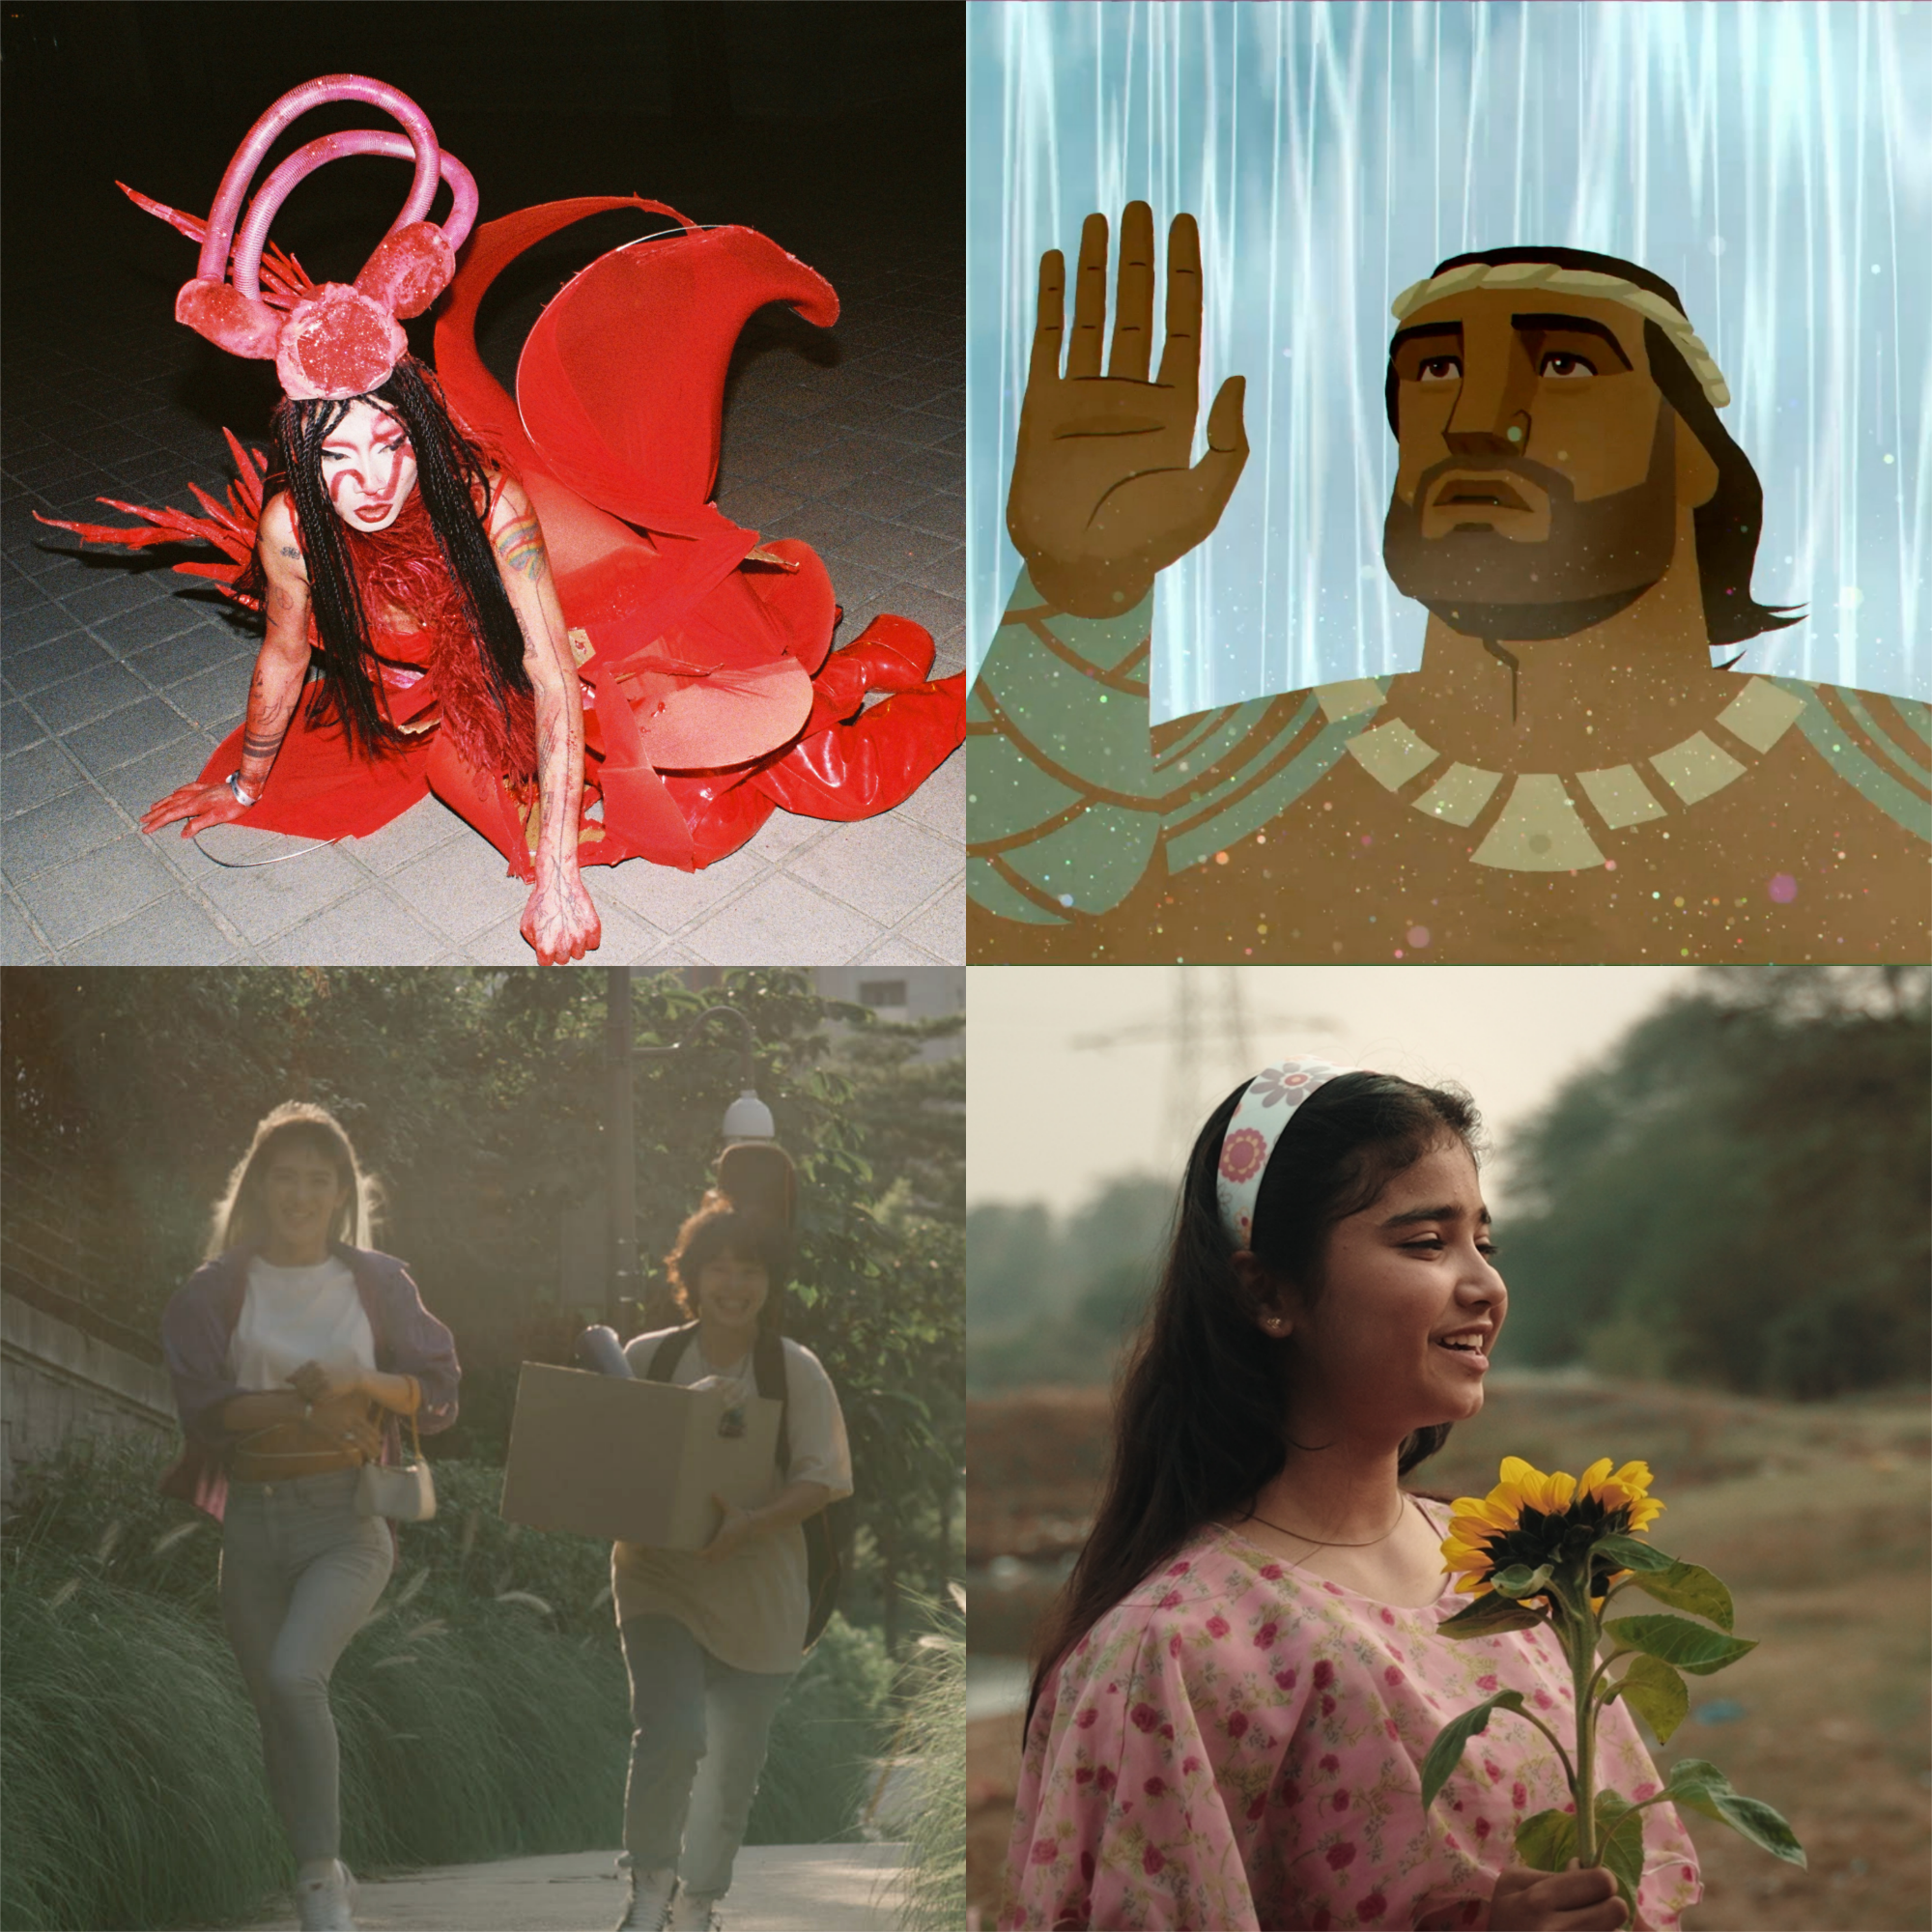 A collage of images: a drag queen, a cartoon man, two women running, and a girl holding a sunflower.